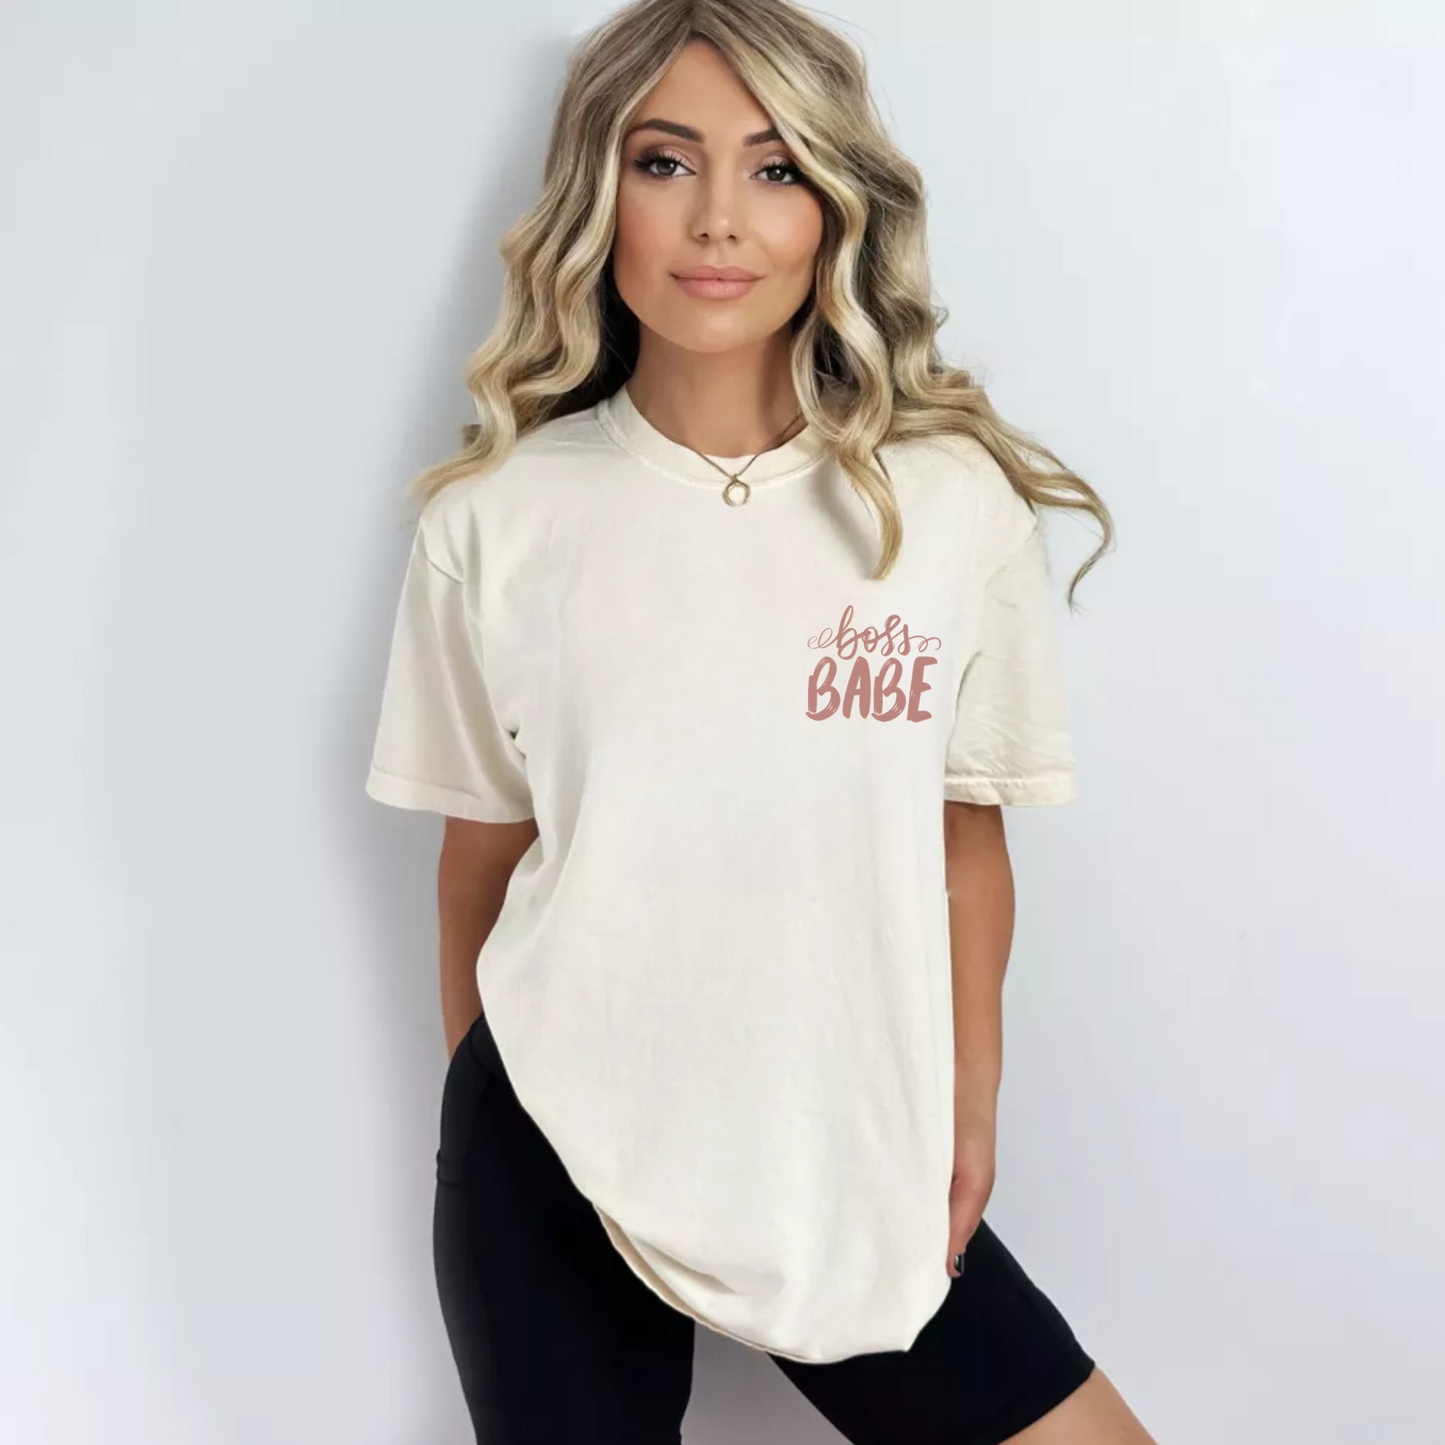 (Shirt not included) Boss Babe POCKET - Clear Film Transfer